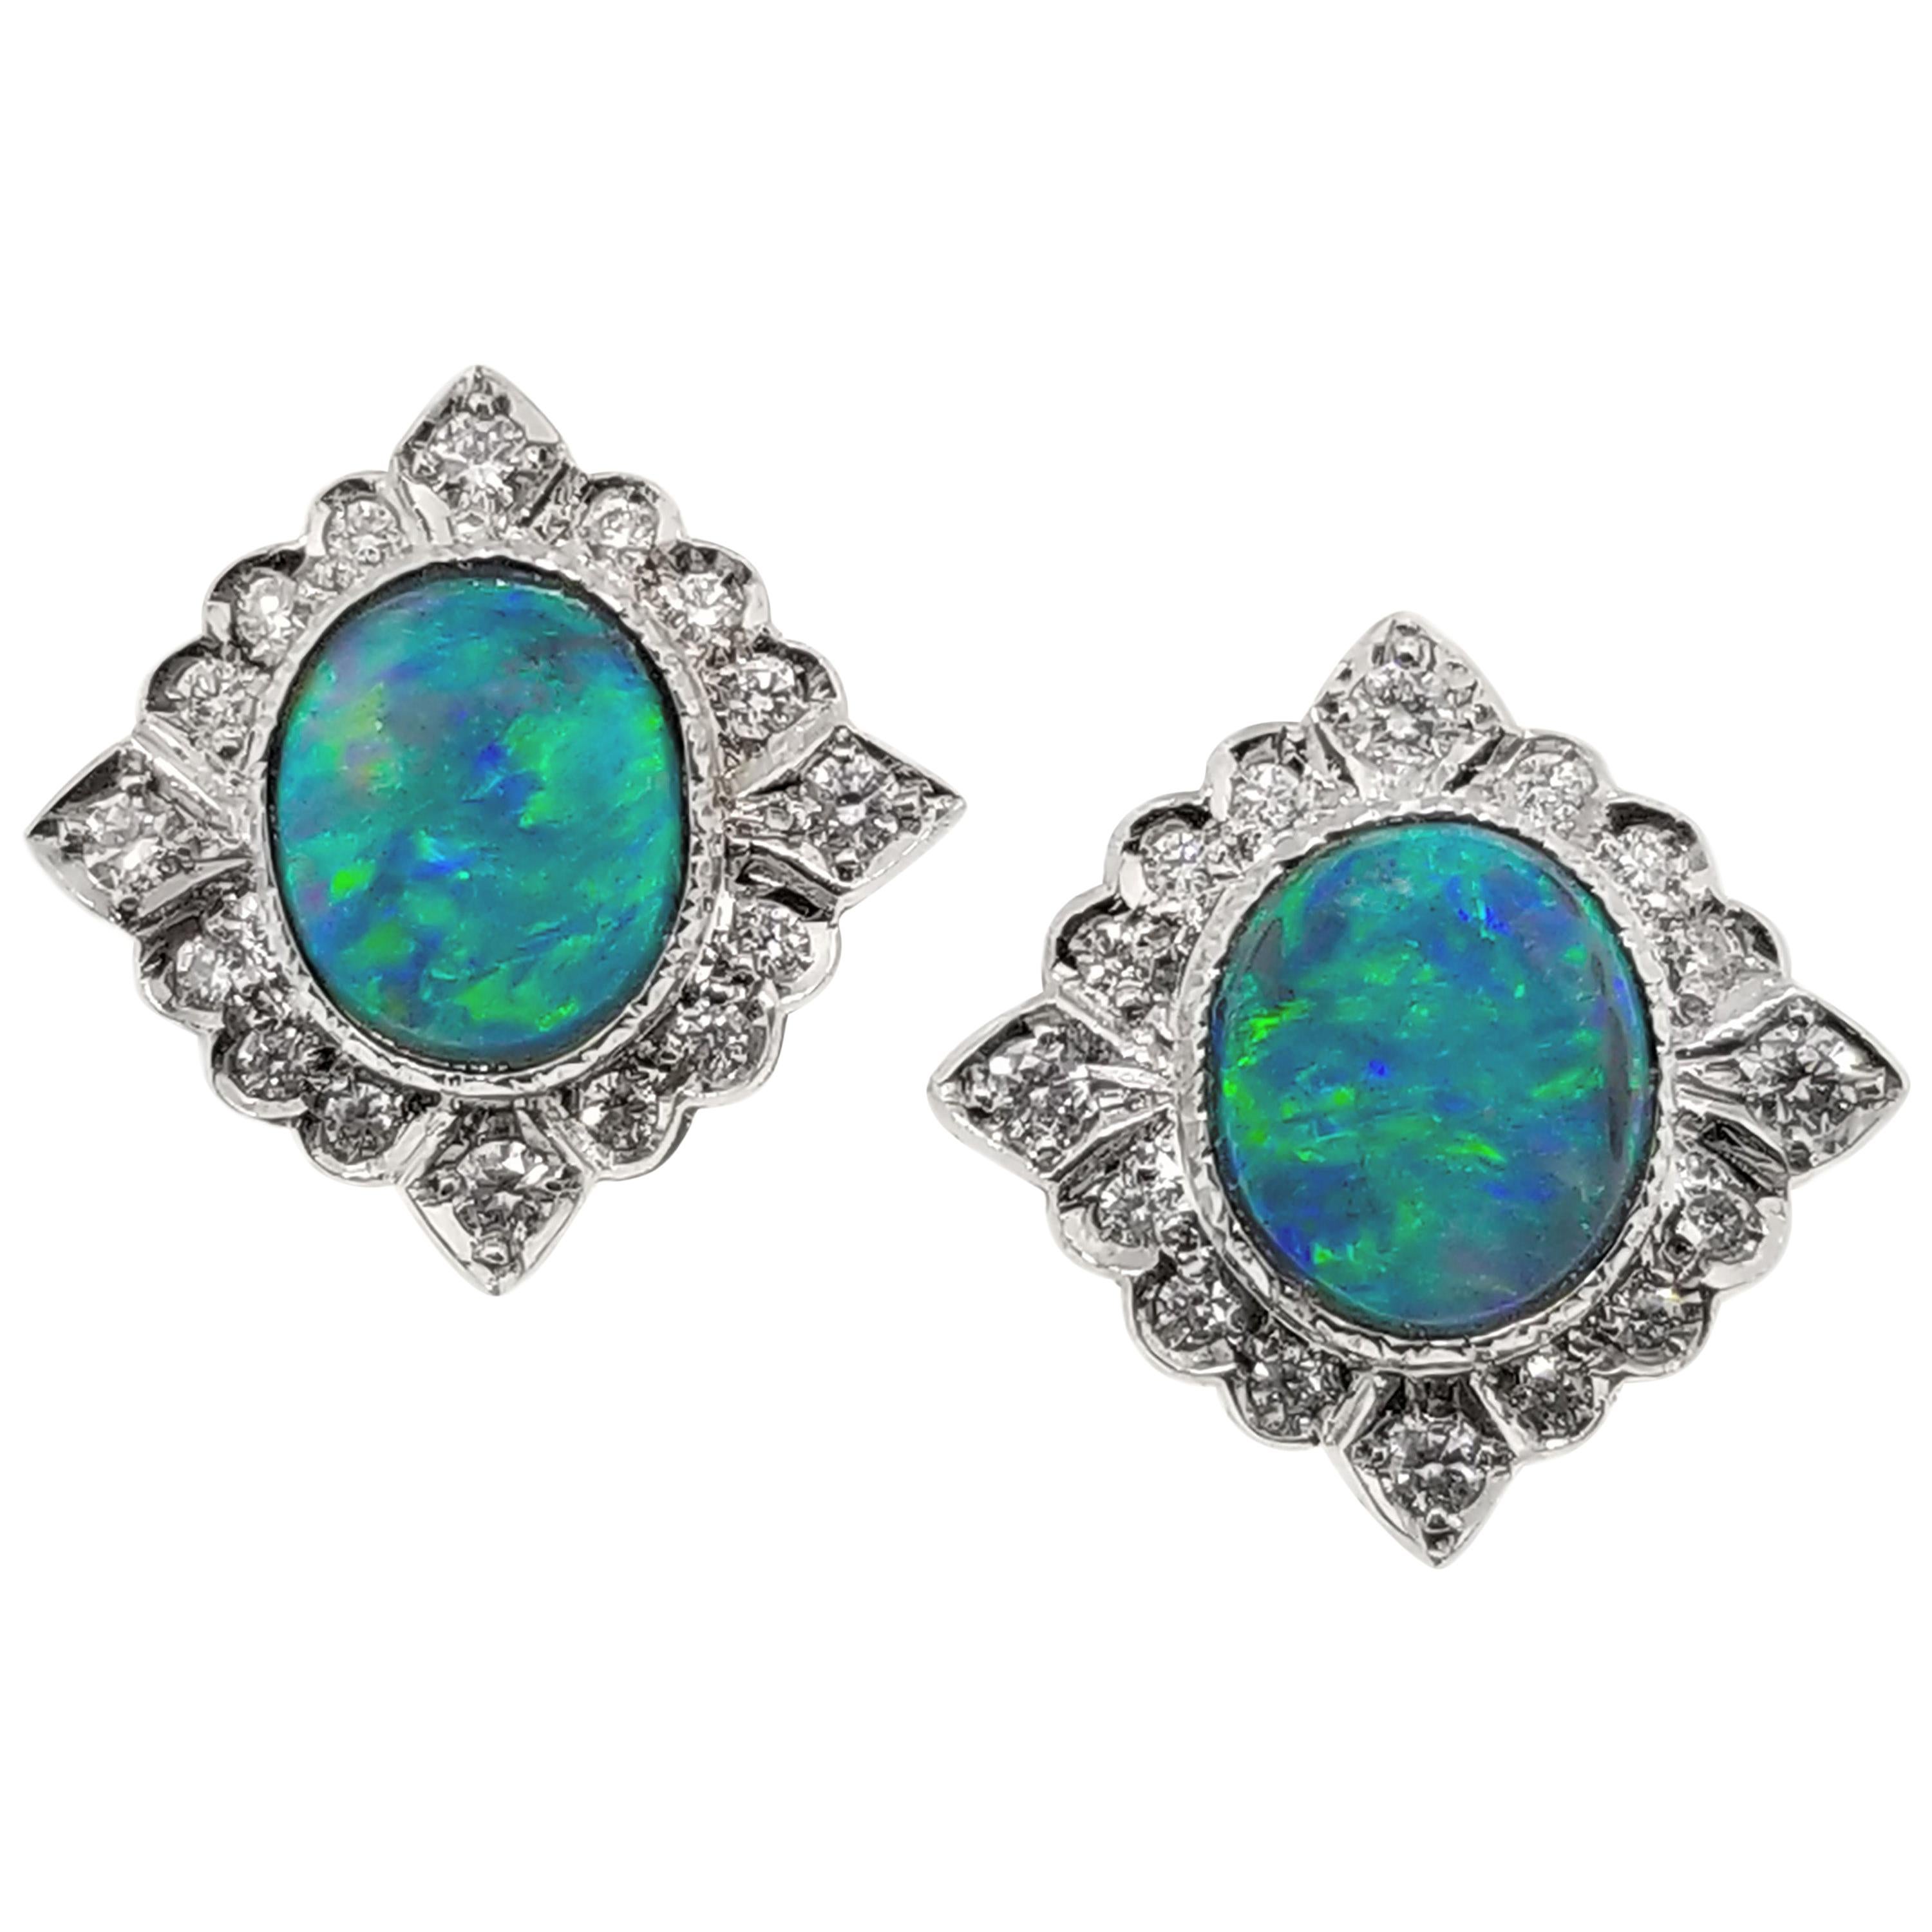 3.64ct Australian Black Opal, Diamond, and 18kt Alessia Earrings, Made in Italy